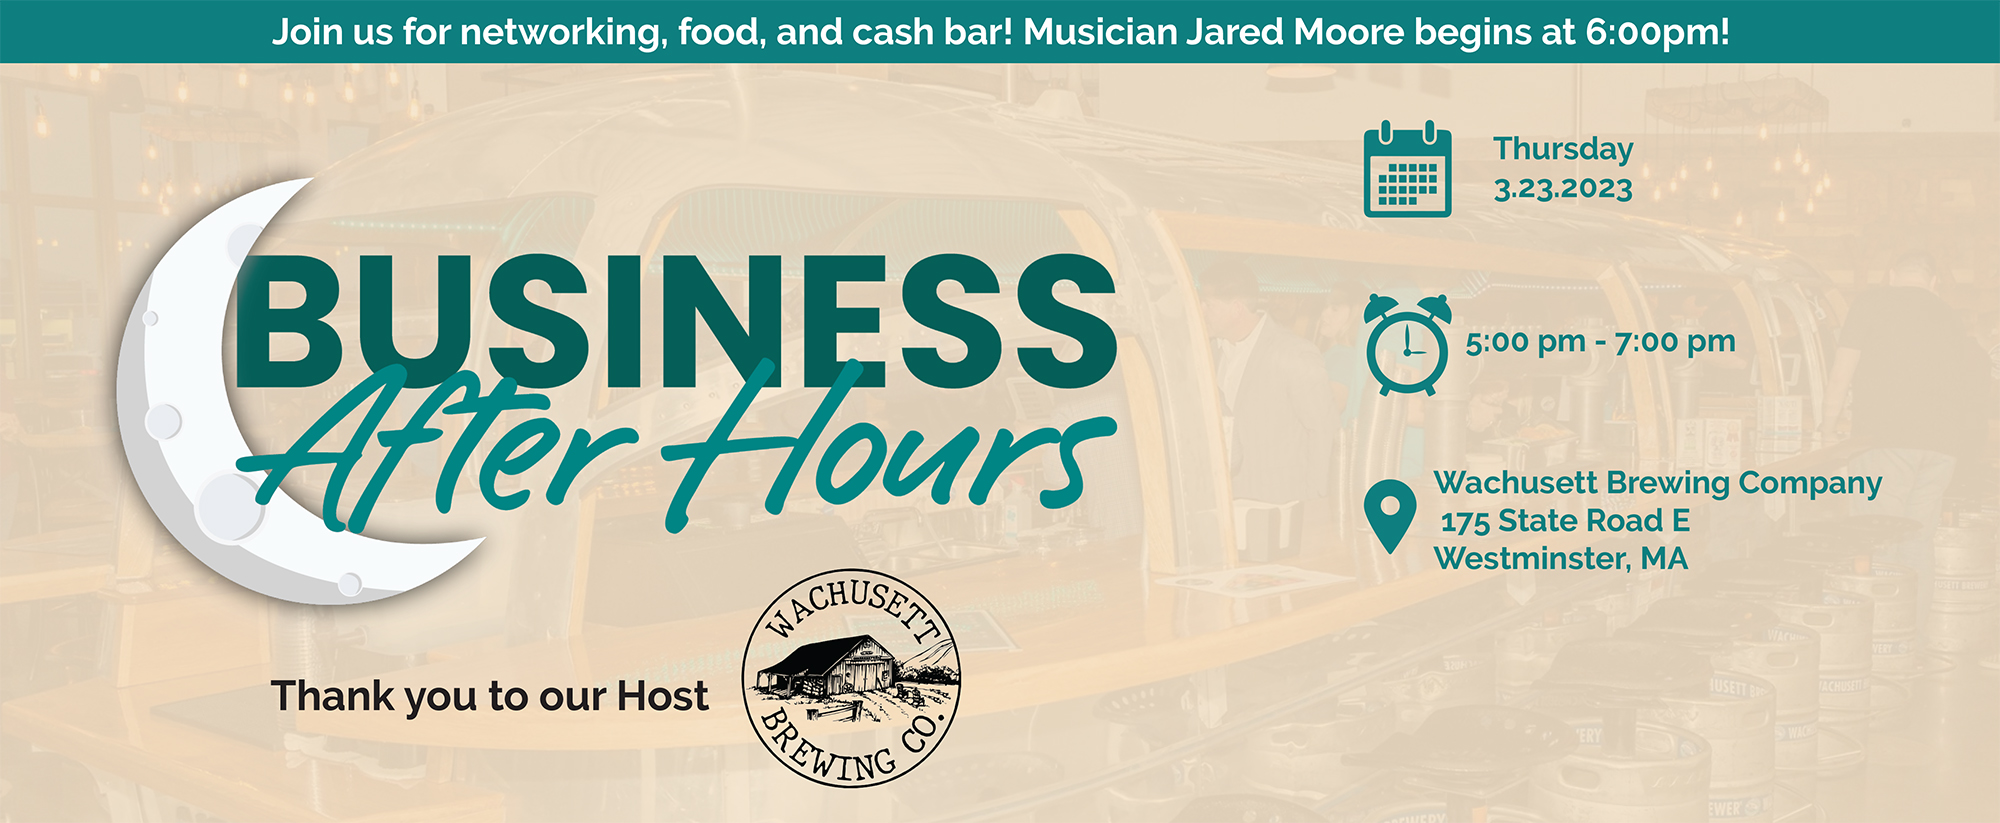 Business After Hours in North Central Massachusetts March 2023